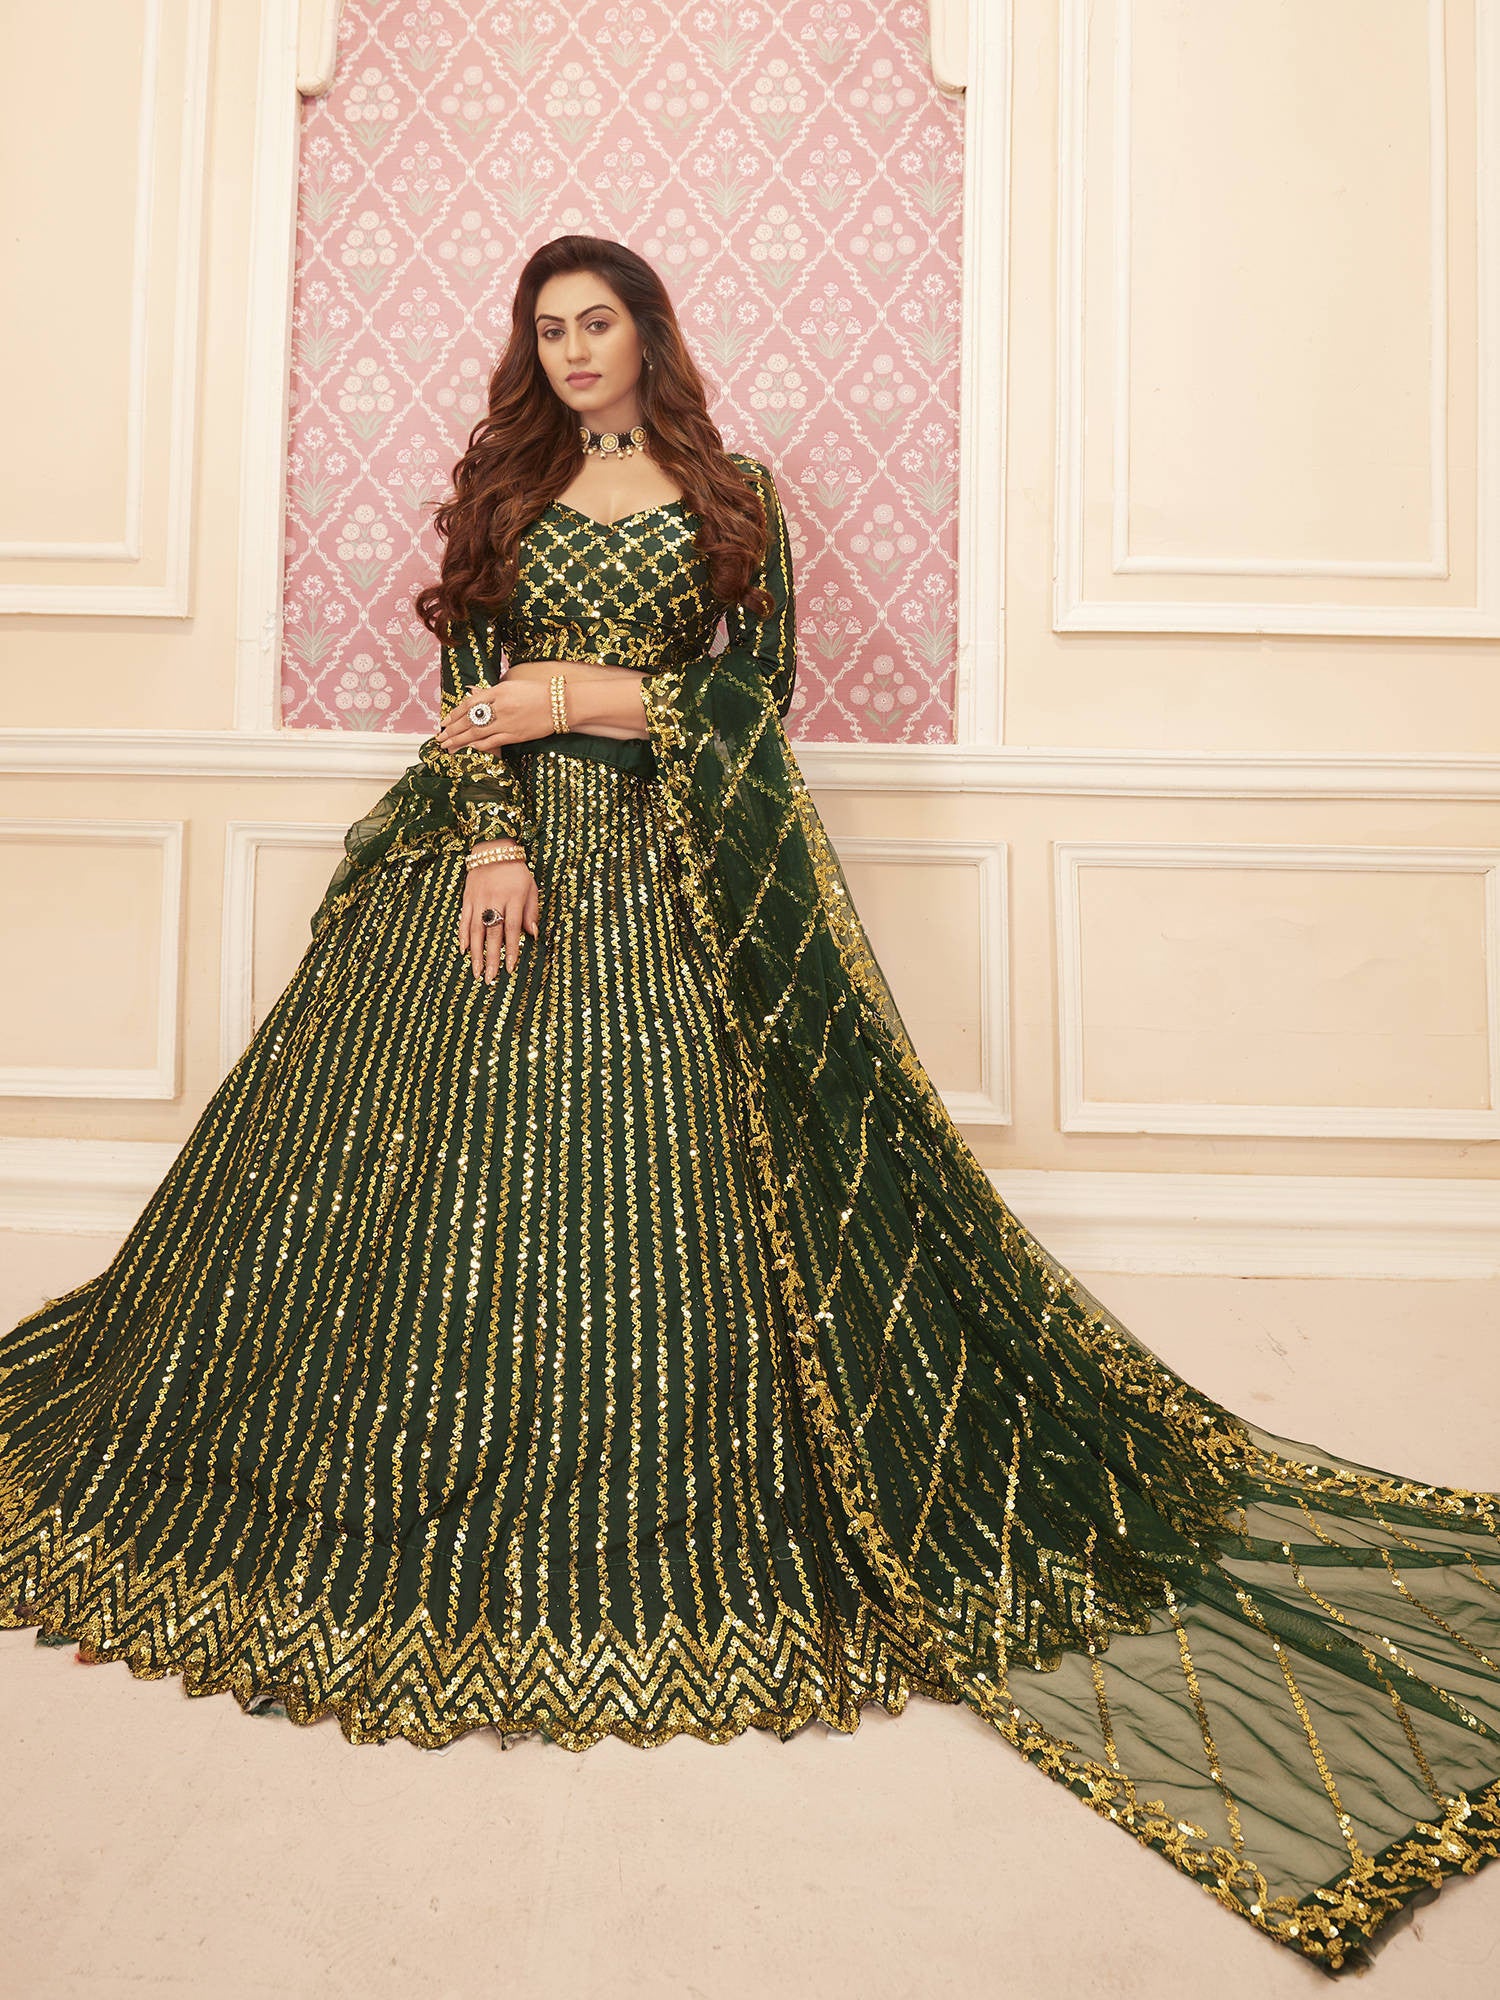 What kind of blouse should be worn with a green or golden coloured Lehenga  for the wedding ceremony? - Quora